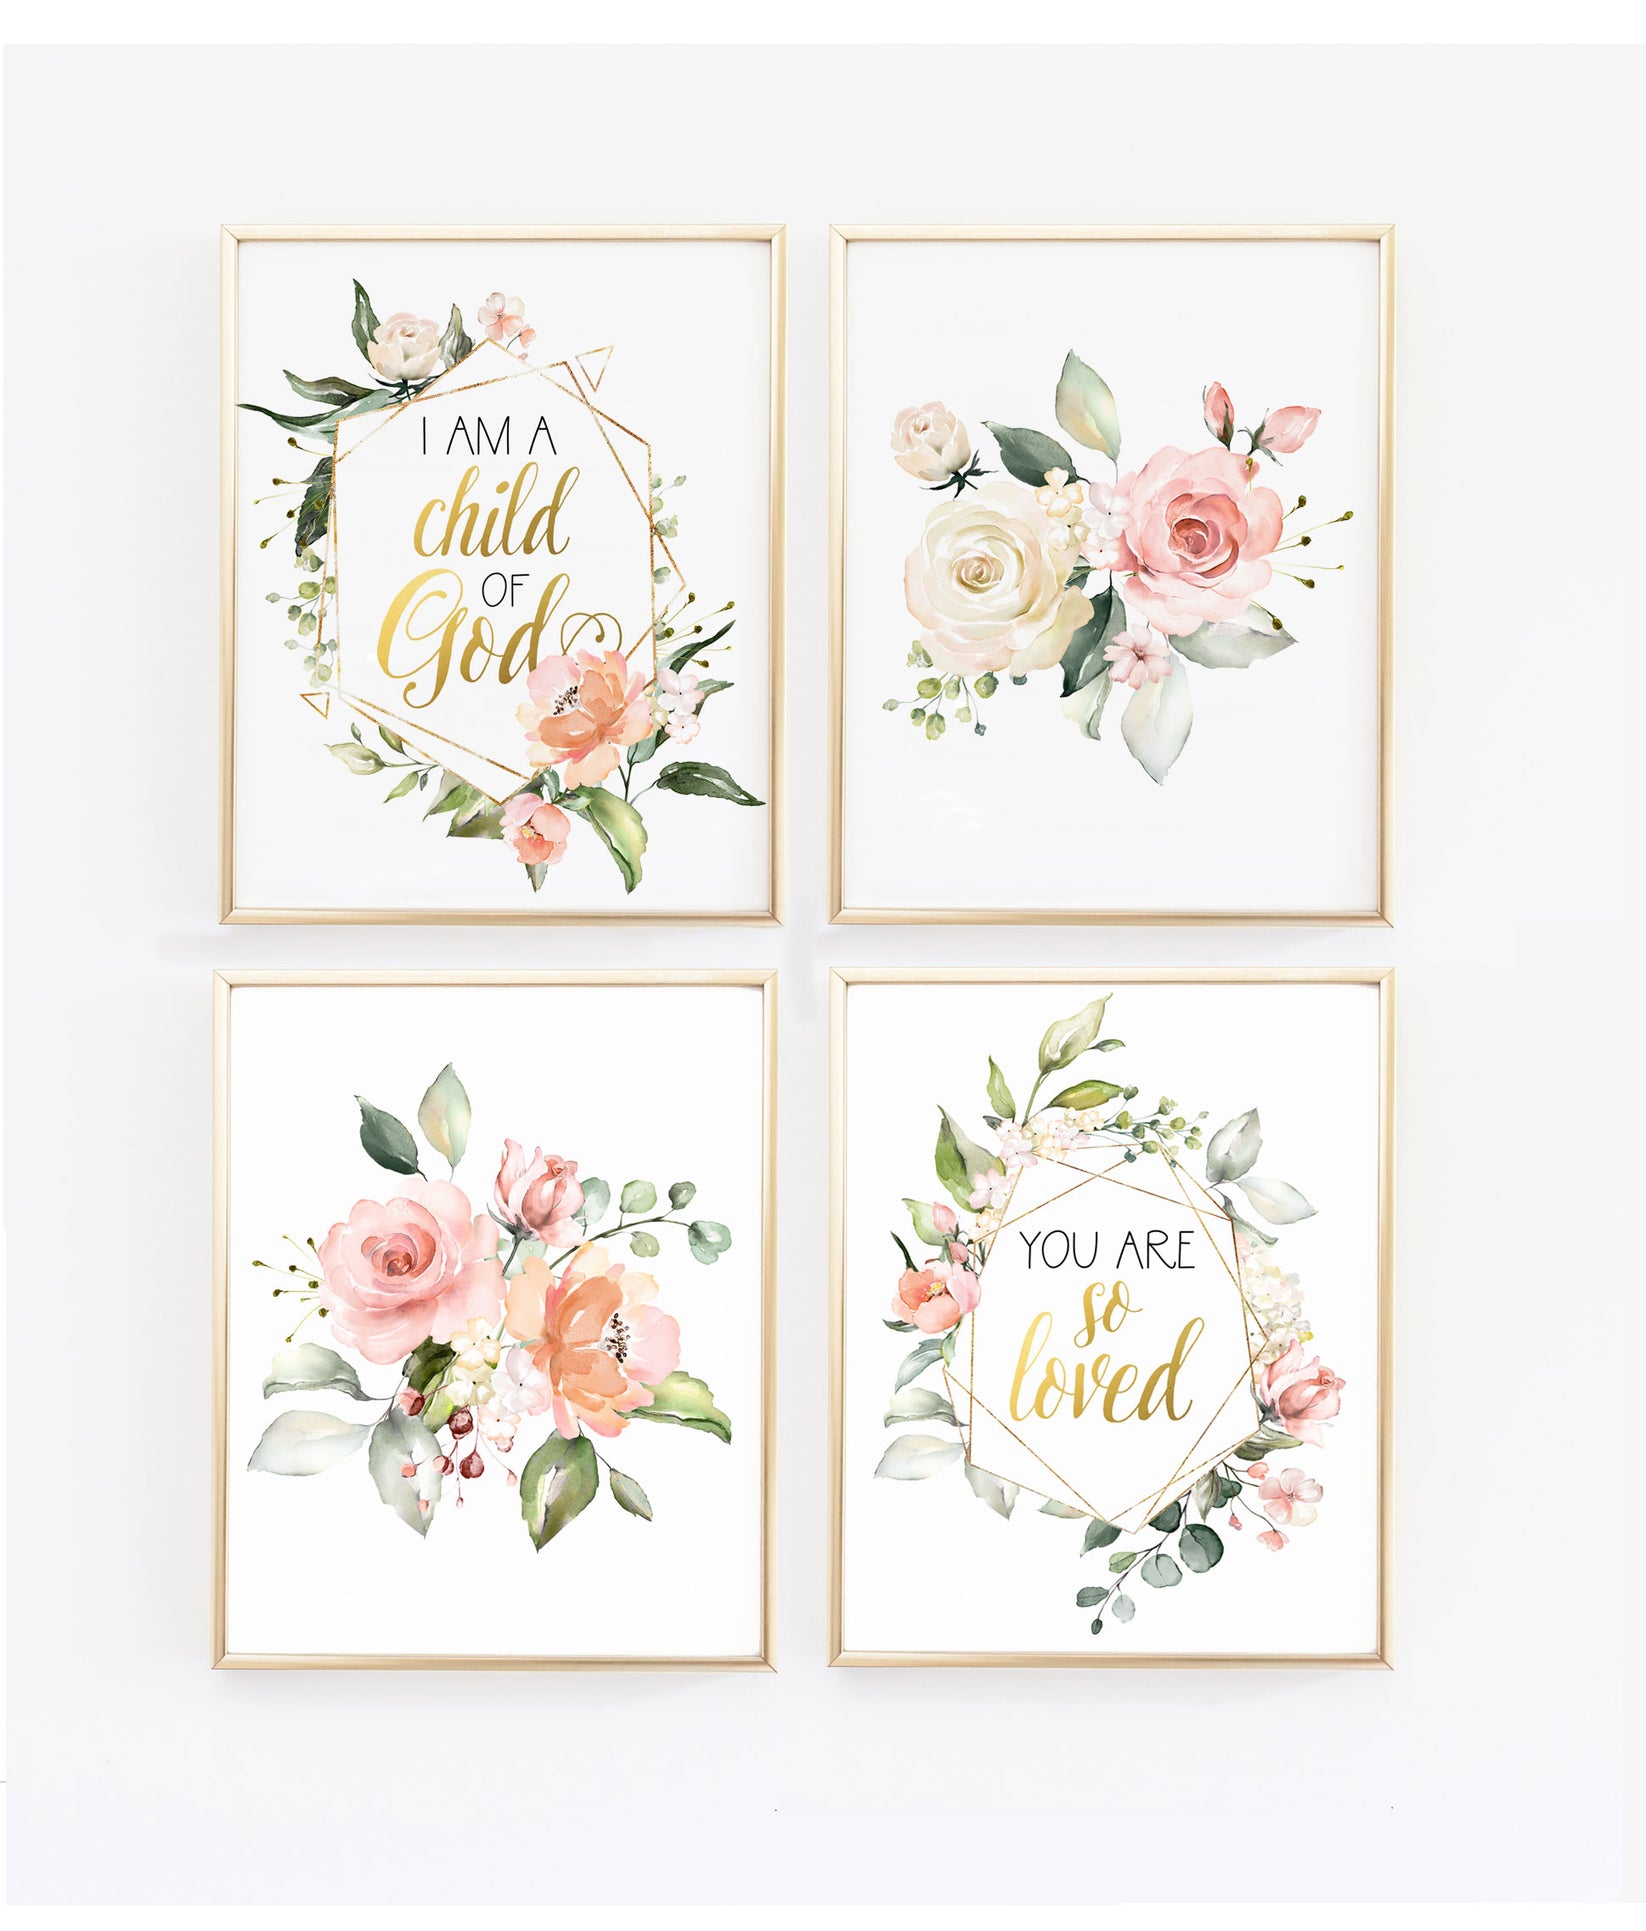 So loved/I am a child of God - Set of four Floral Geometric Wall Art ...